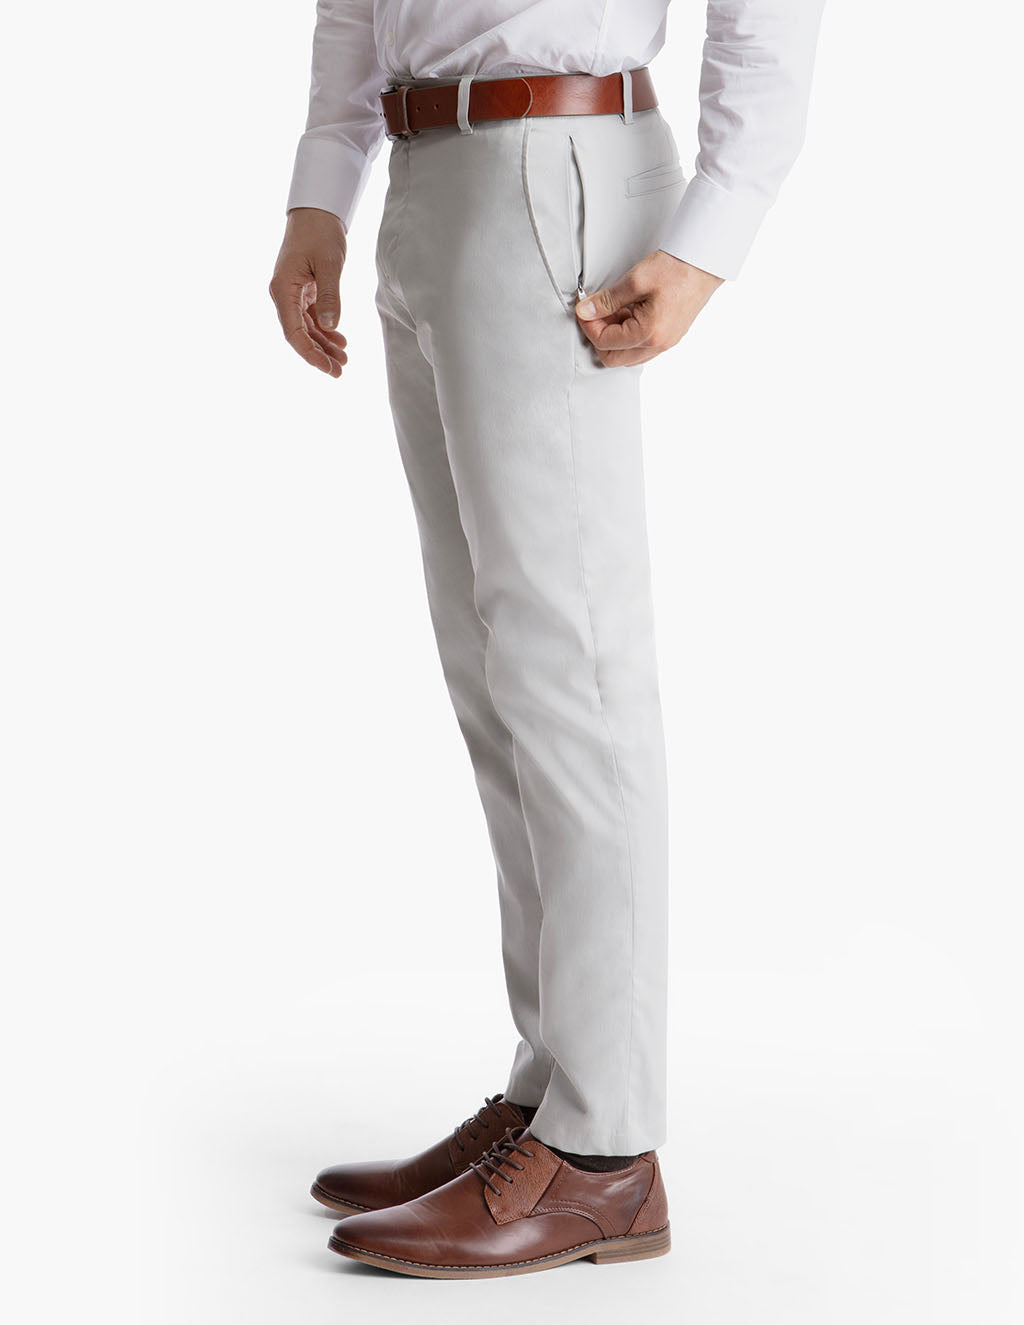 Cuffed suit pants look good | SOLETOPIA